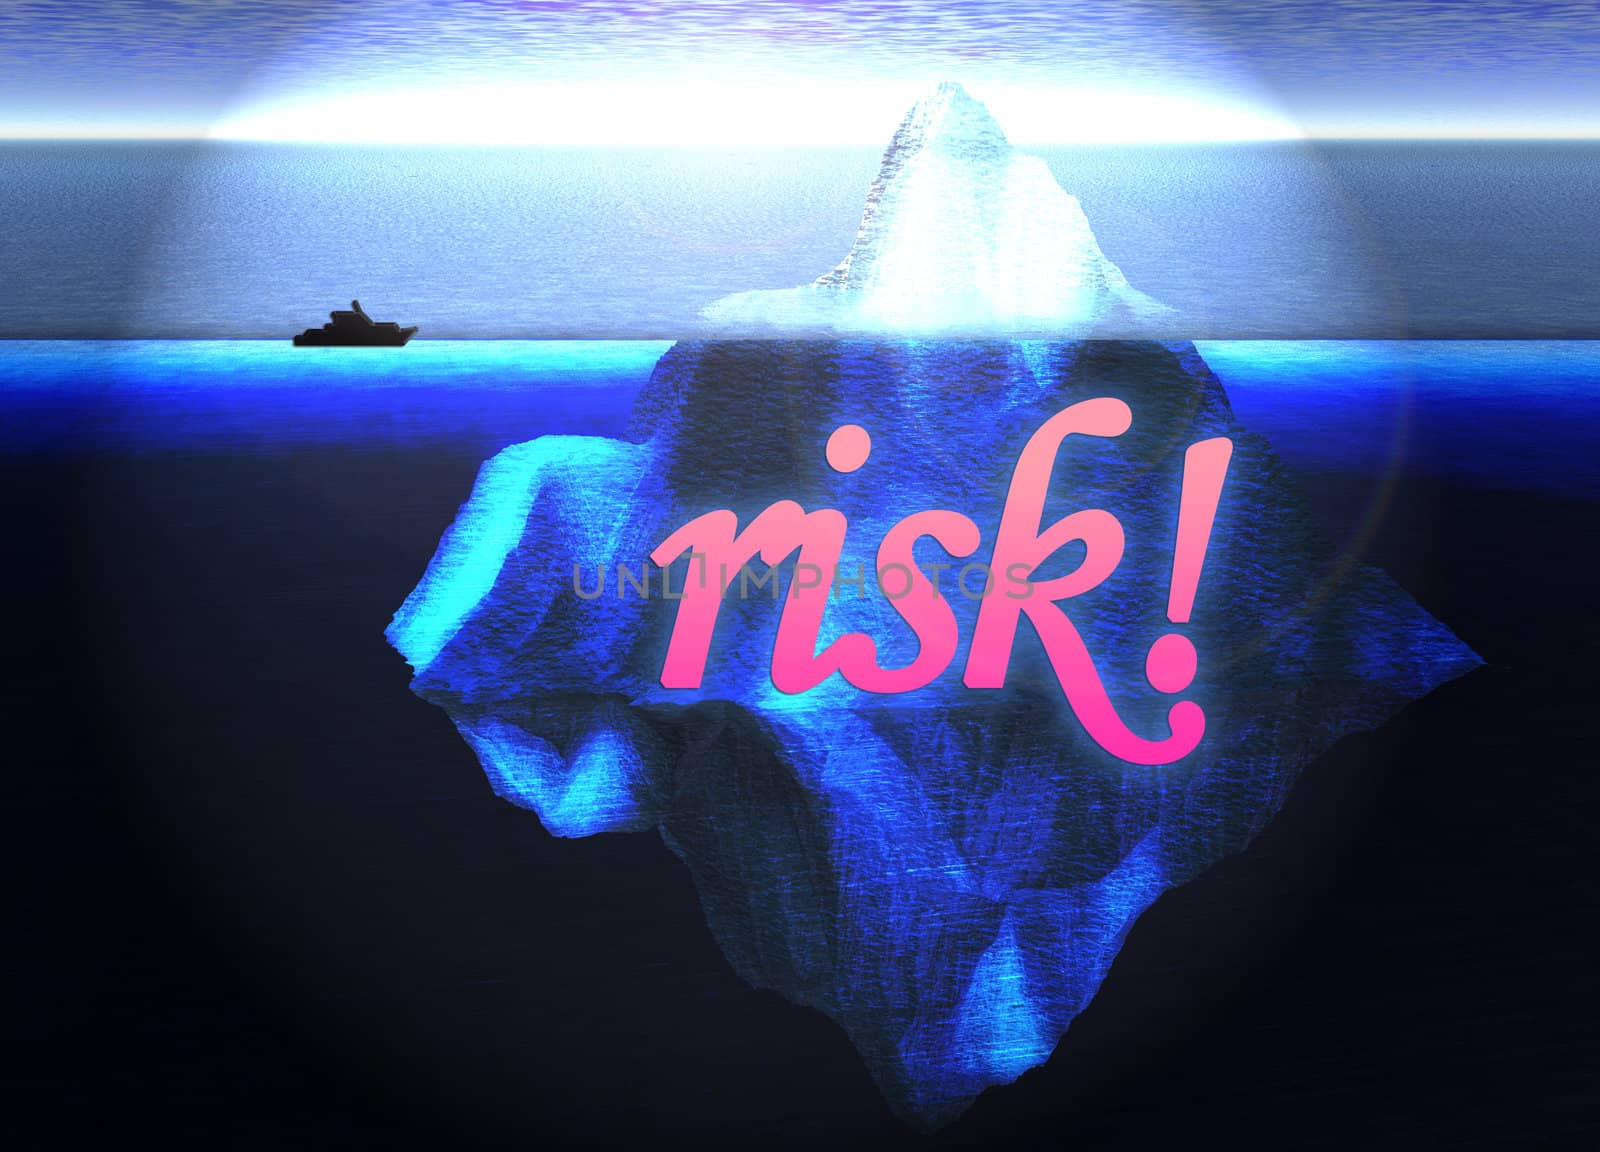 Floating Iceberg in the Open Ocean with Small Boat and Risk Text Nearby Illustration